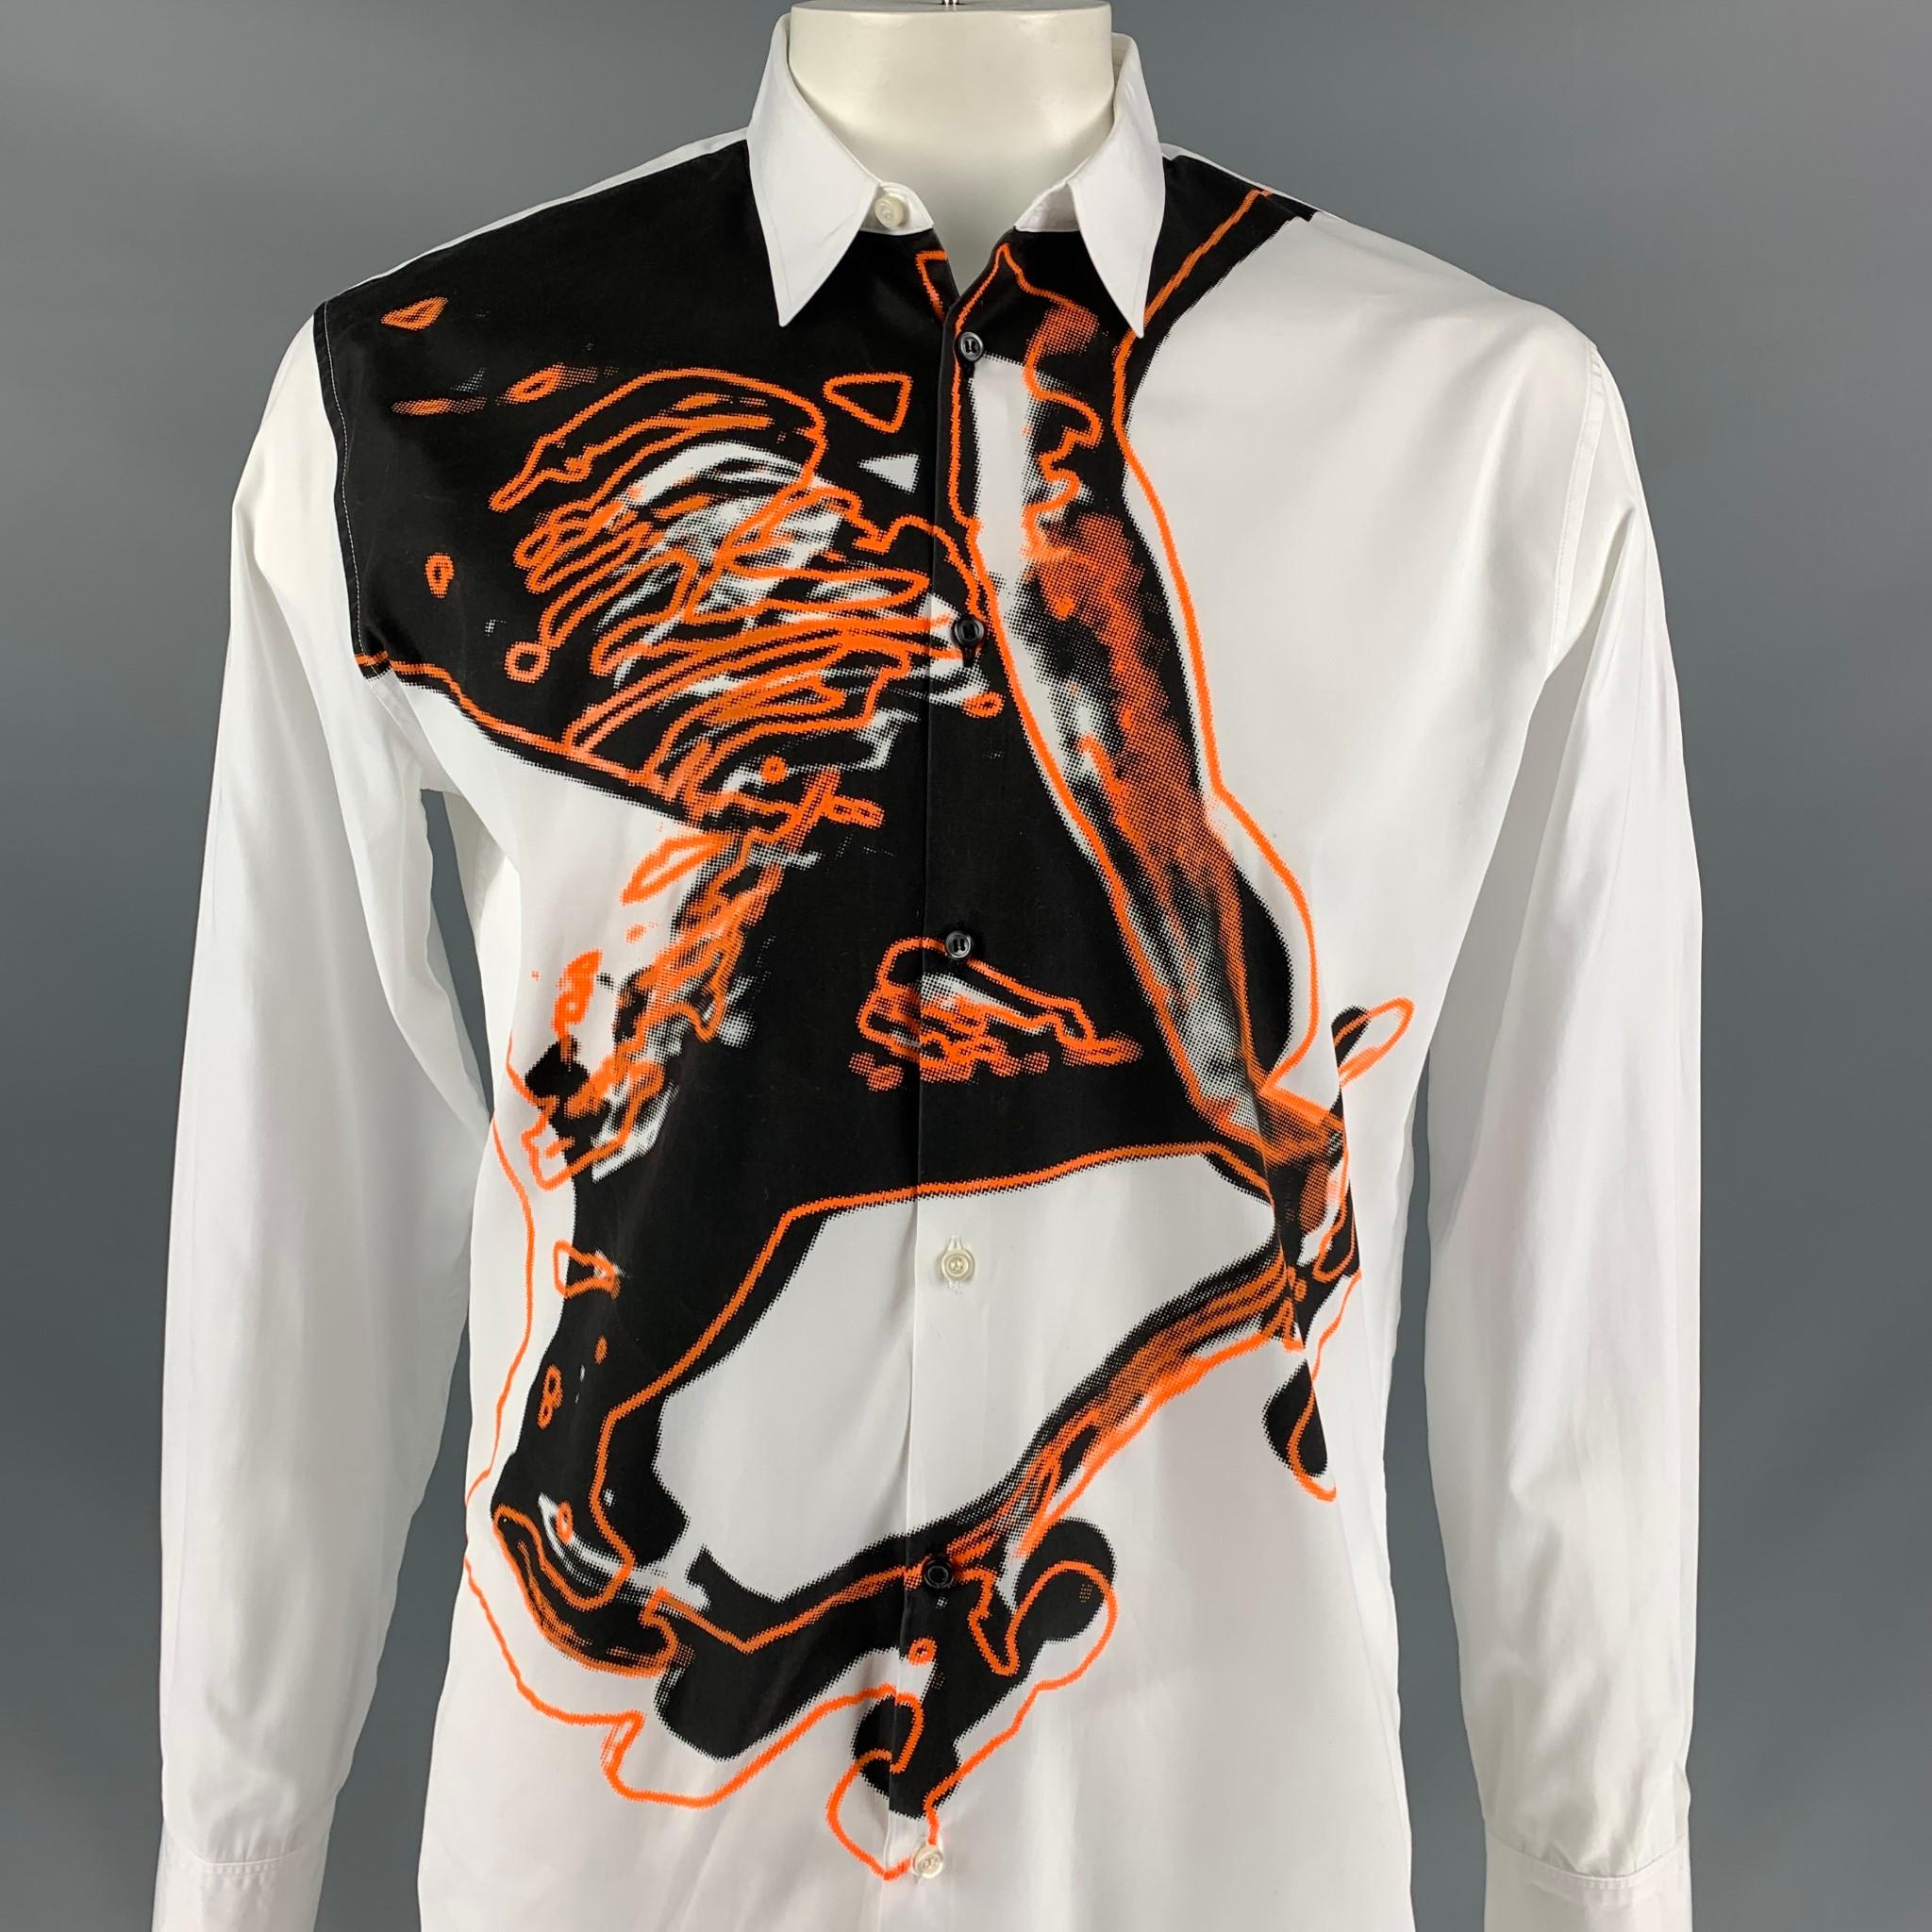 DSQUARED2 long sleeve shirt comes in a white & black abstract print cotton with a orange trim featuring a spread collar and a button up closure. Made in Italy. 

Very Good Pre-Owned Condition.
Marked: 52

Measurements:

Shoulder: 19 in.
Chest: 44